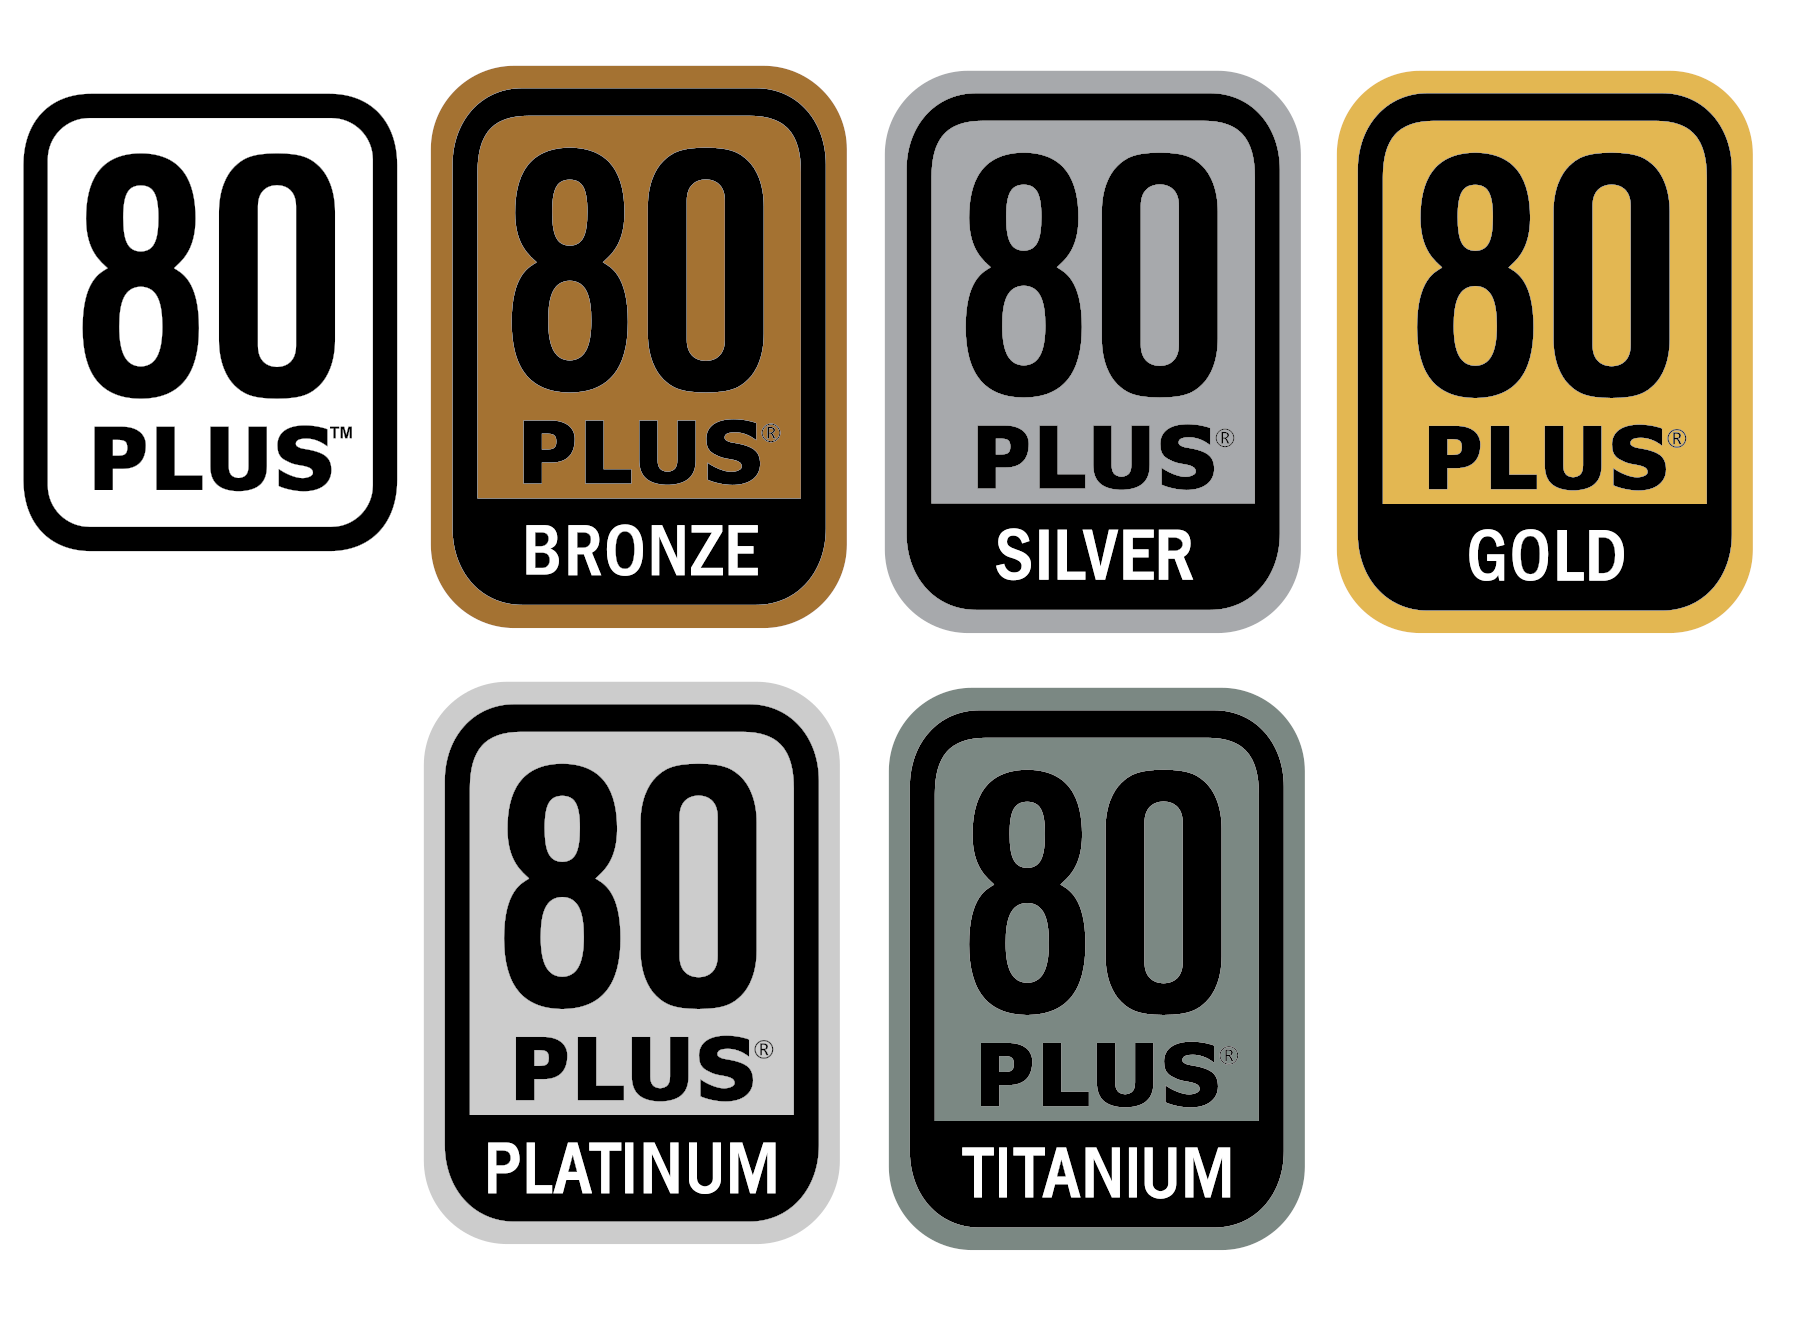 6 PSU efficiency labels that each read 80 PLUS. 5 of them also indicate an element: bronze, silver, gold, platinum, or titanium.